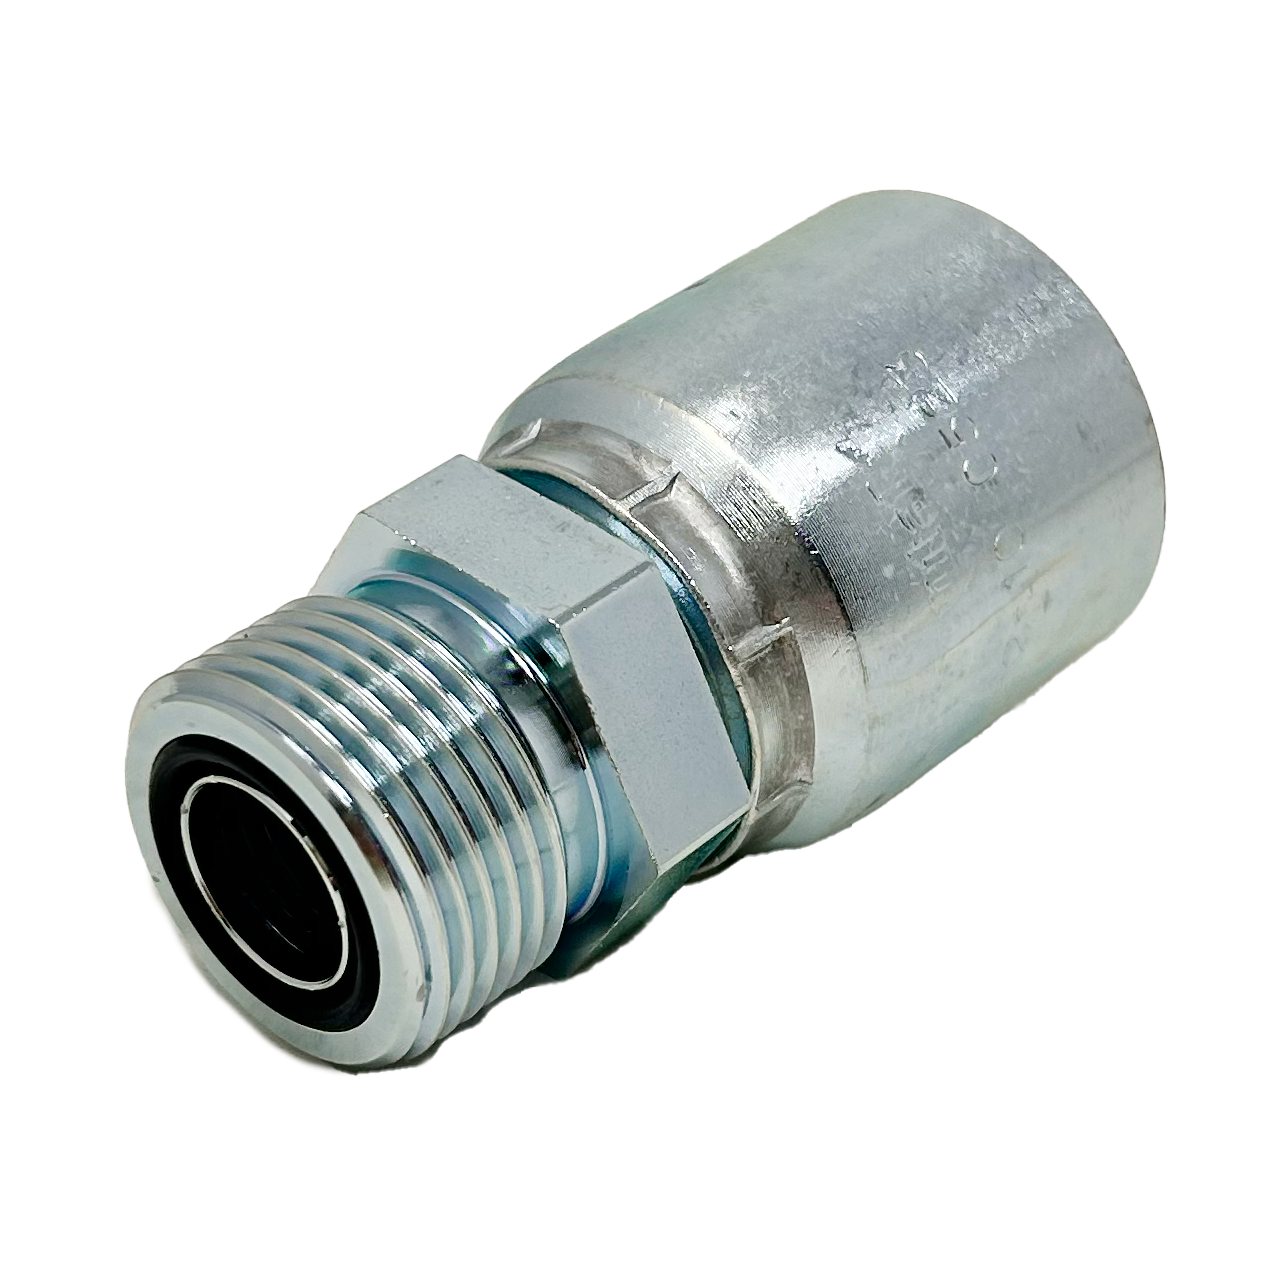 B2-OFM-1212: Continental Hose Fitting, 0.75 (3/4") Hose ID x 1-3/16-12 Male ORFS, Straight Rigid Connection